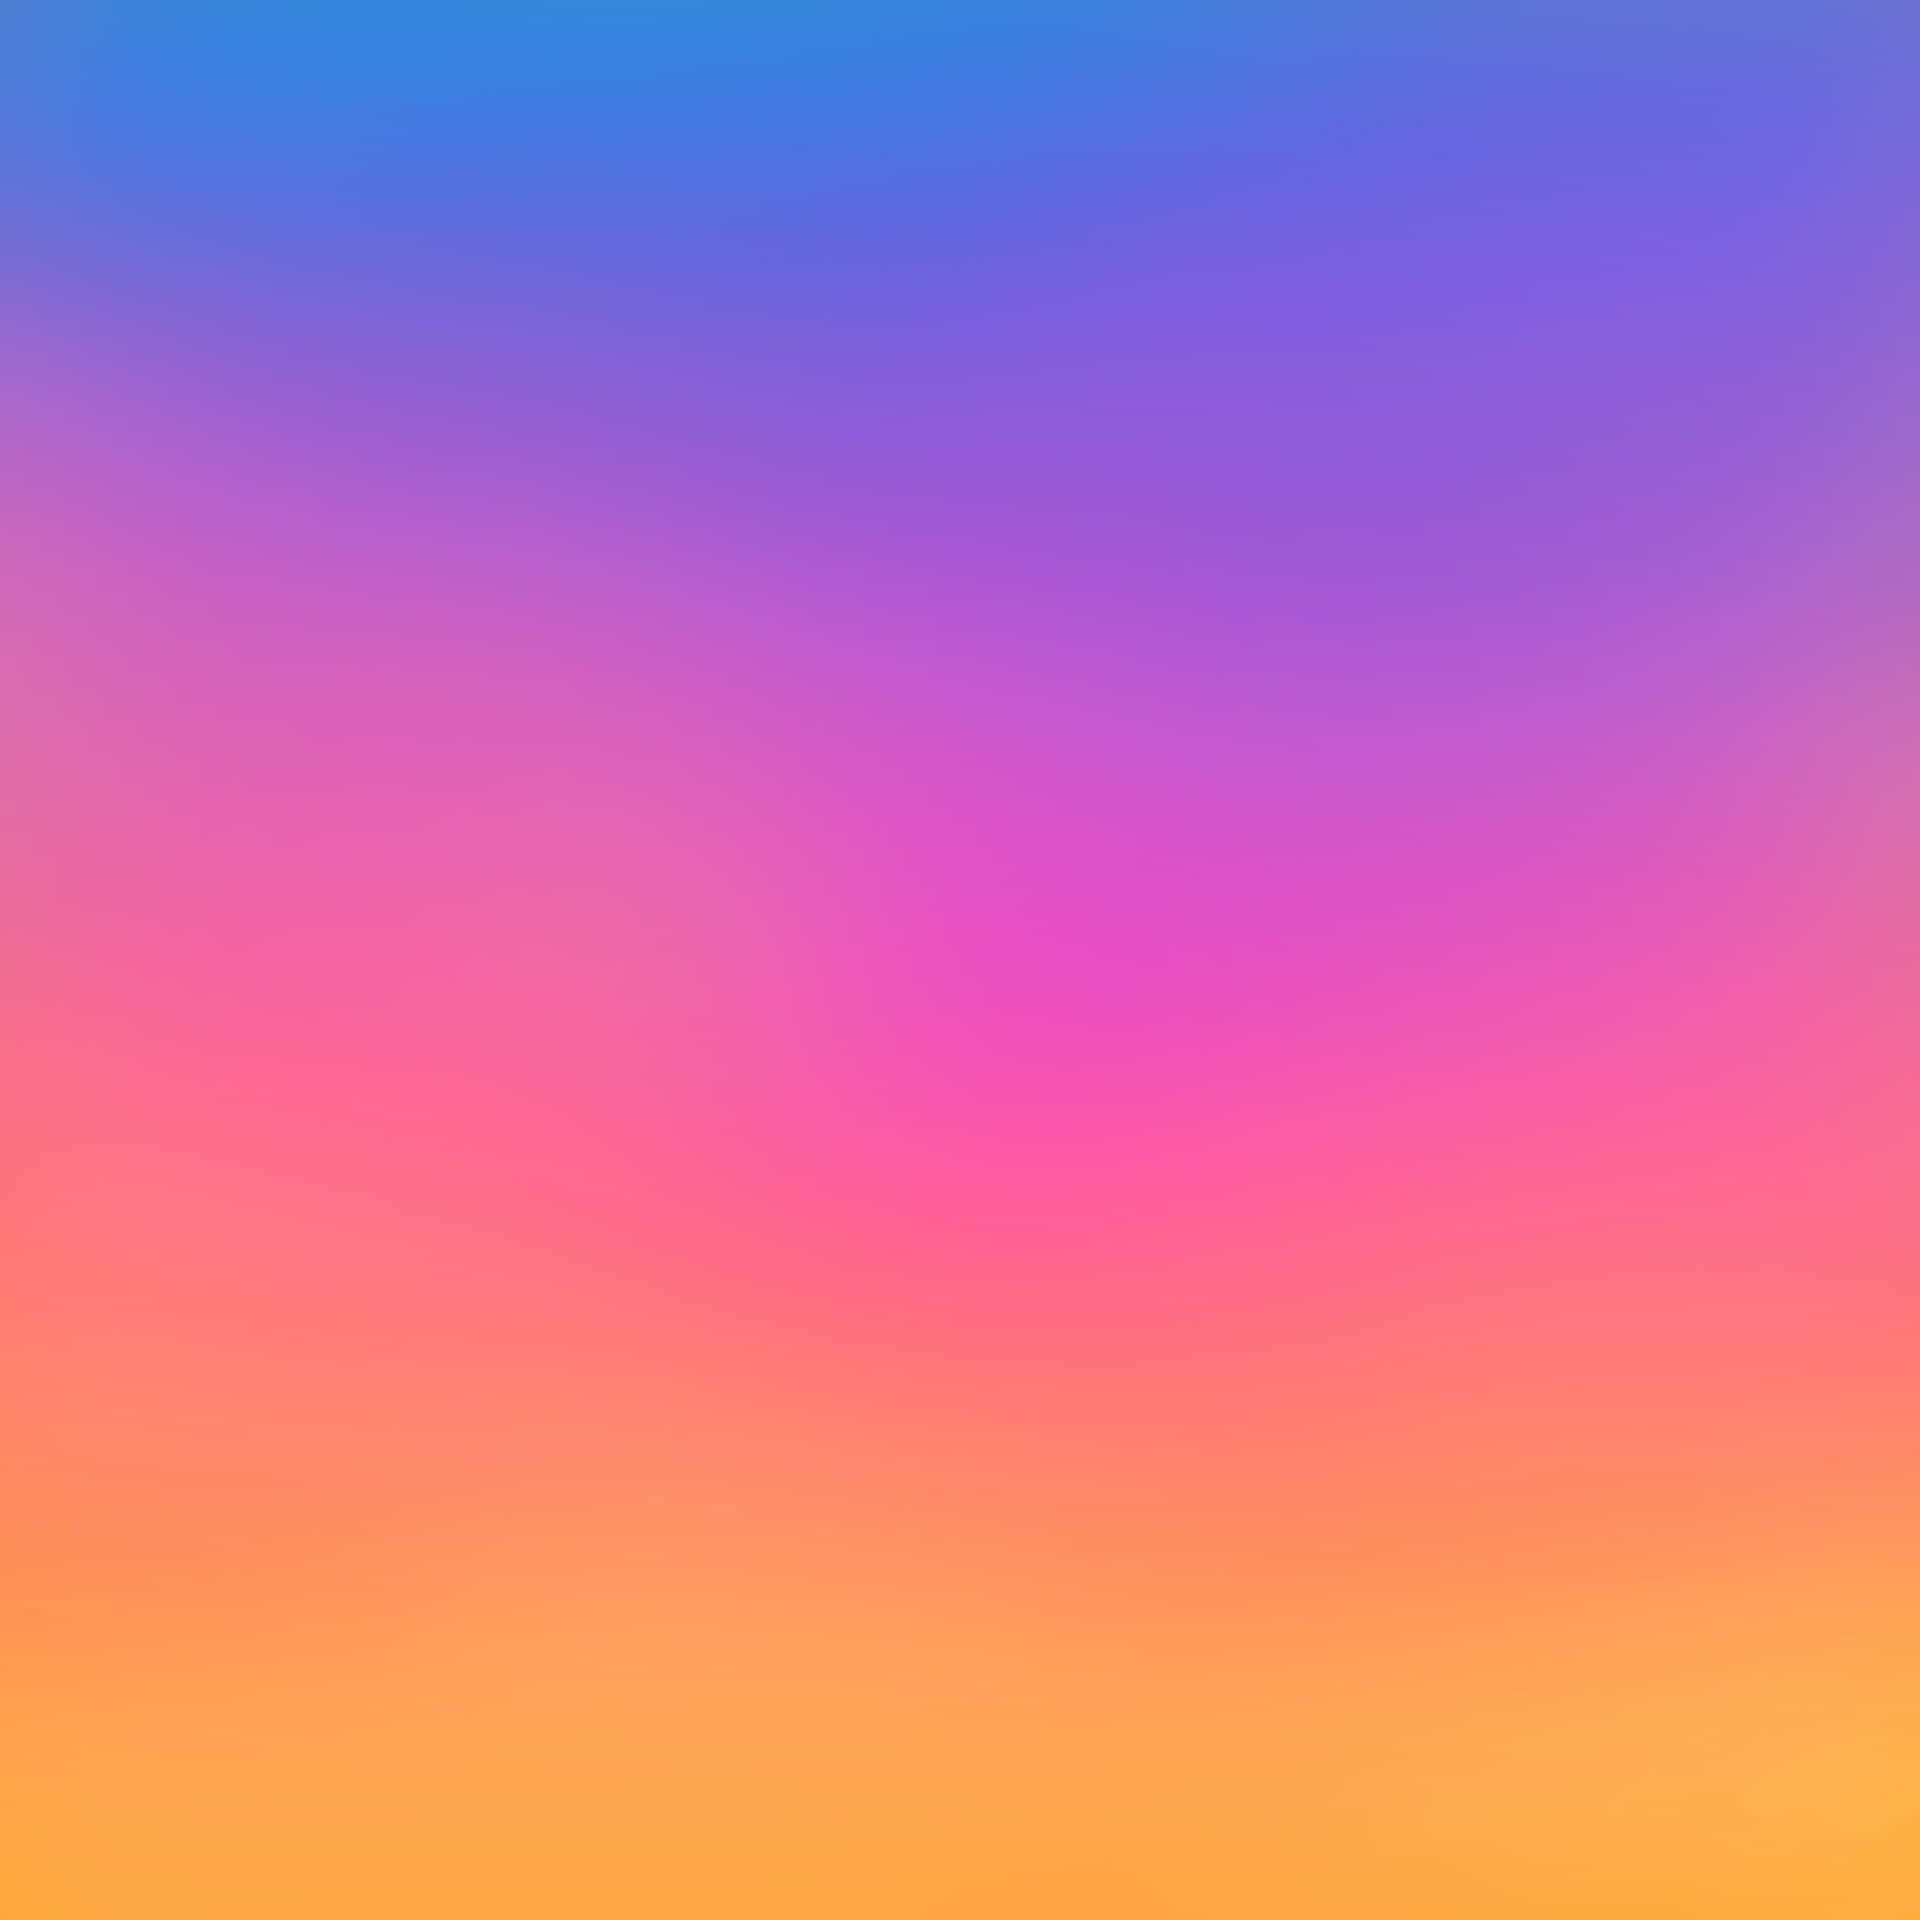 A Vibrant Painting of the Pink, Yellow, and Blue Color Scheme. Wallpaper